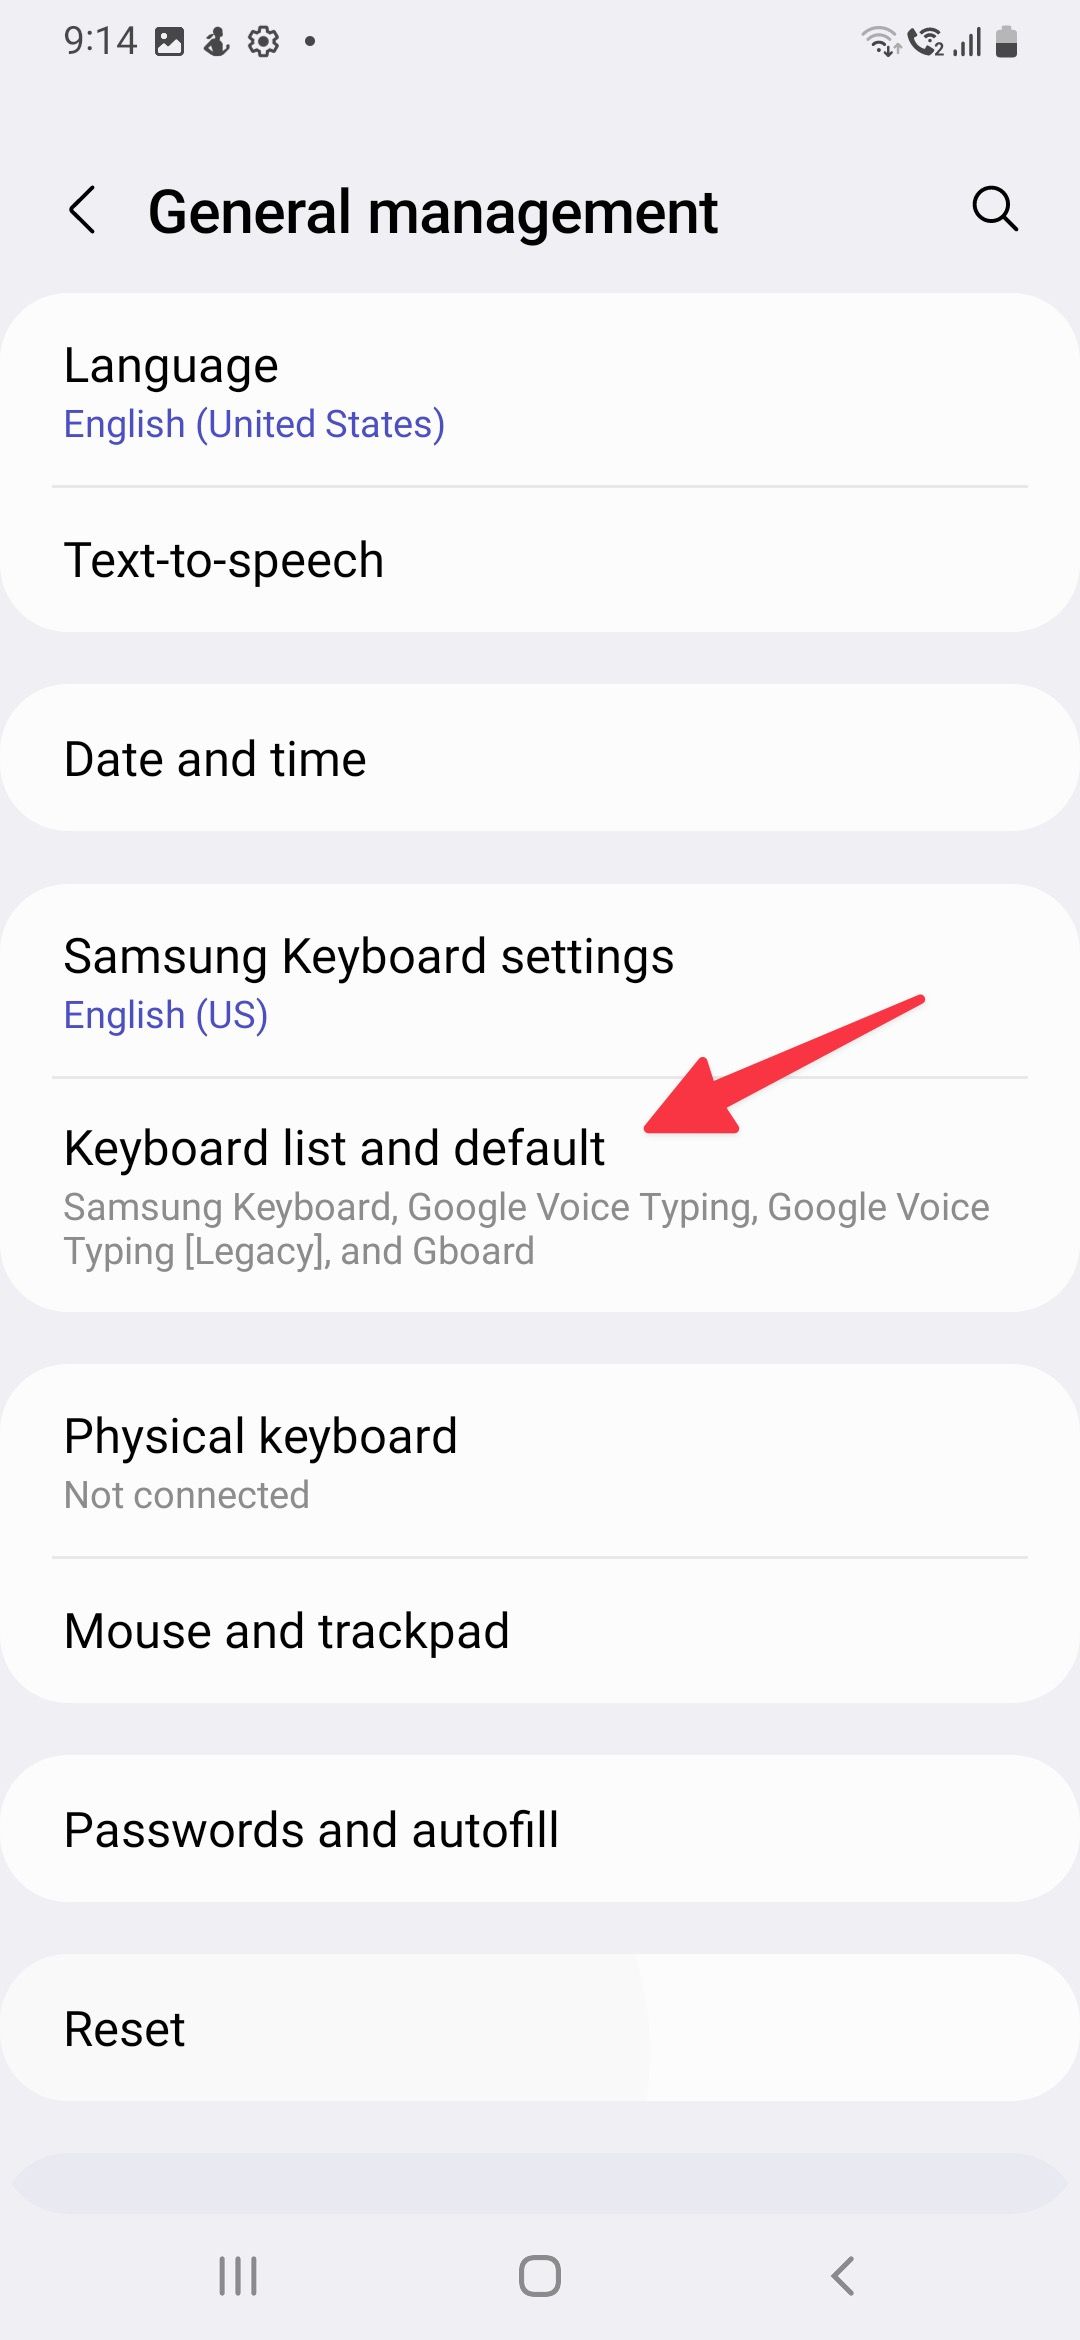 select keyboard list and default